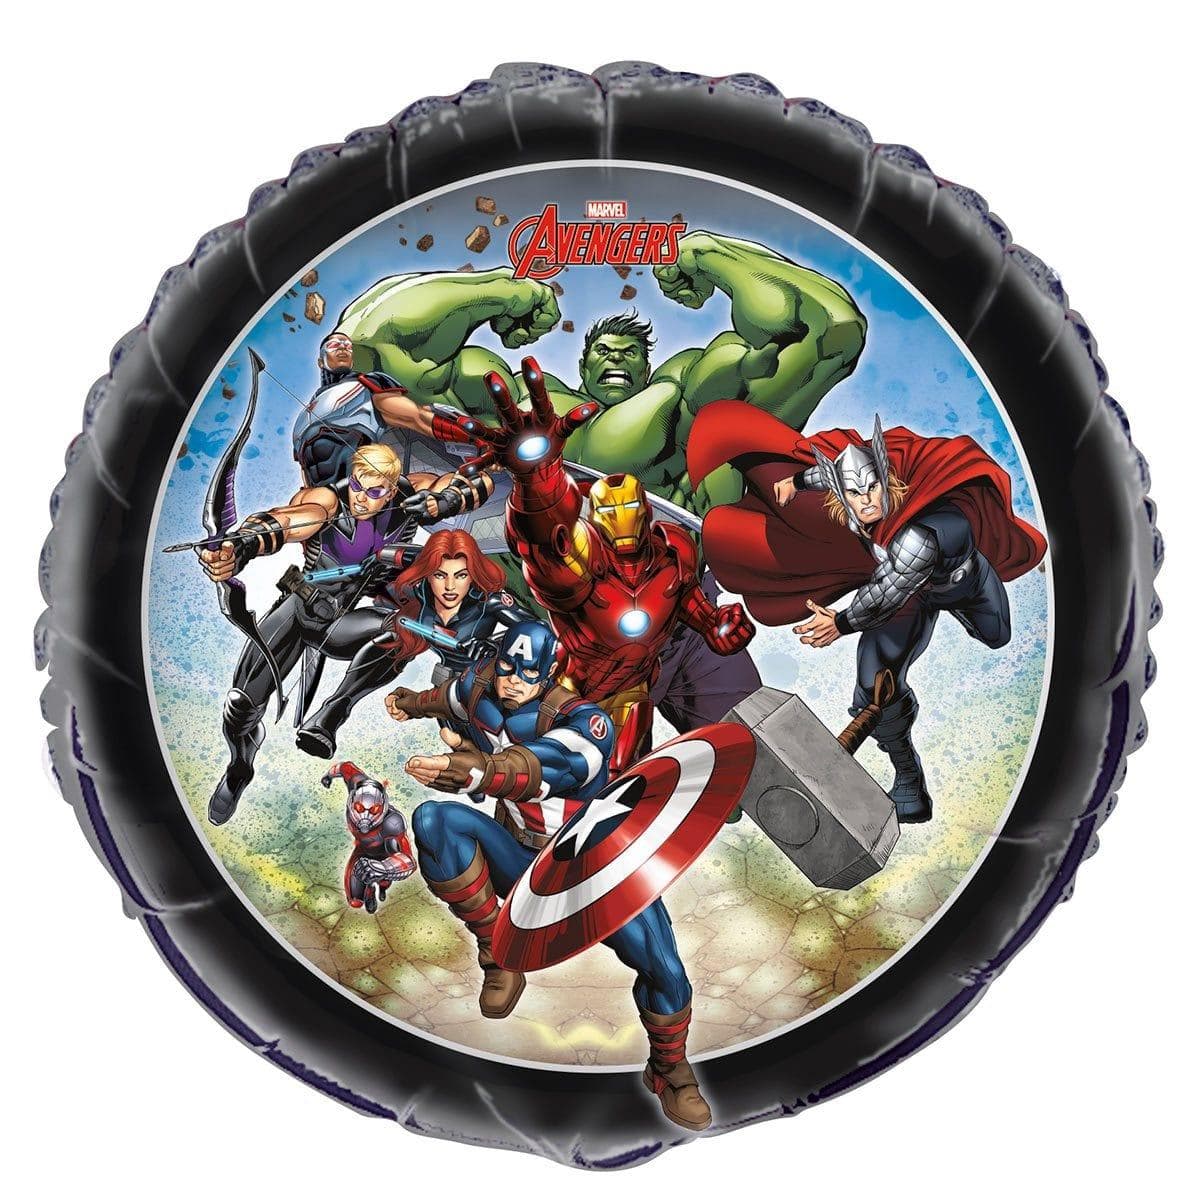 Buy Balloons Avengers Assemble Foil Balloon, 18 Inches sold at Party Expert